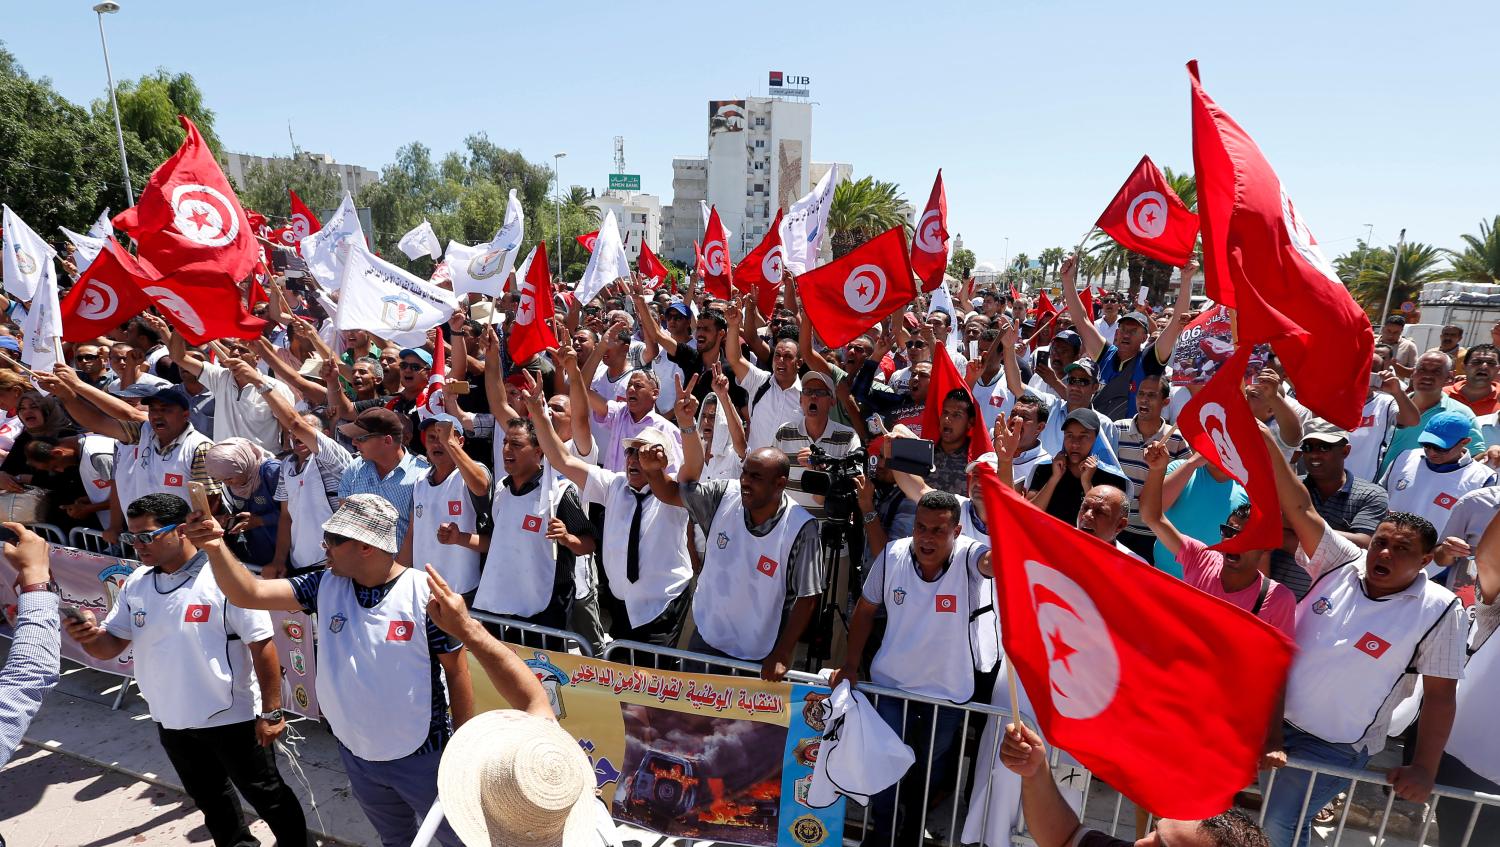 Tunisian police officers and security personnel hold flags and shout slogans during a protest in Tunis, Tunisia July 6,2017. REUTERS/Zoubeir Souissi